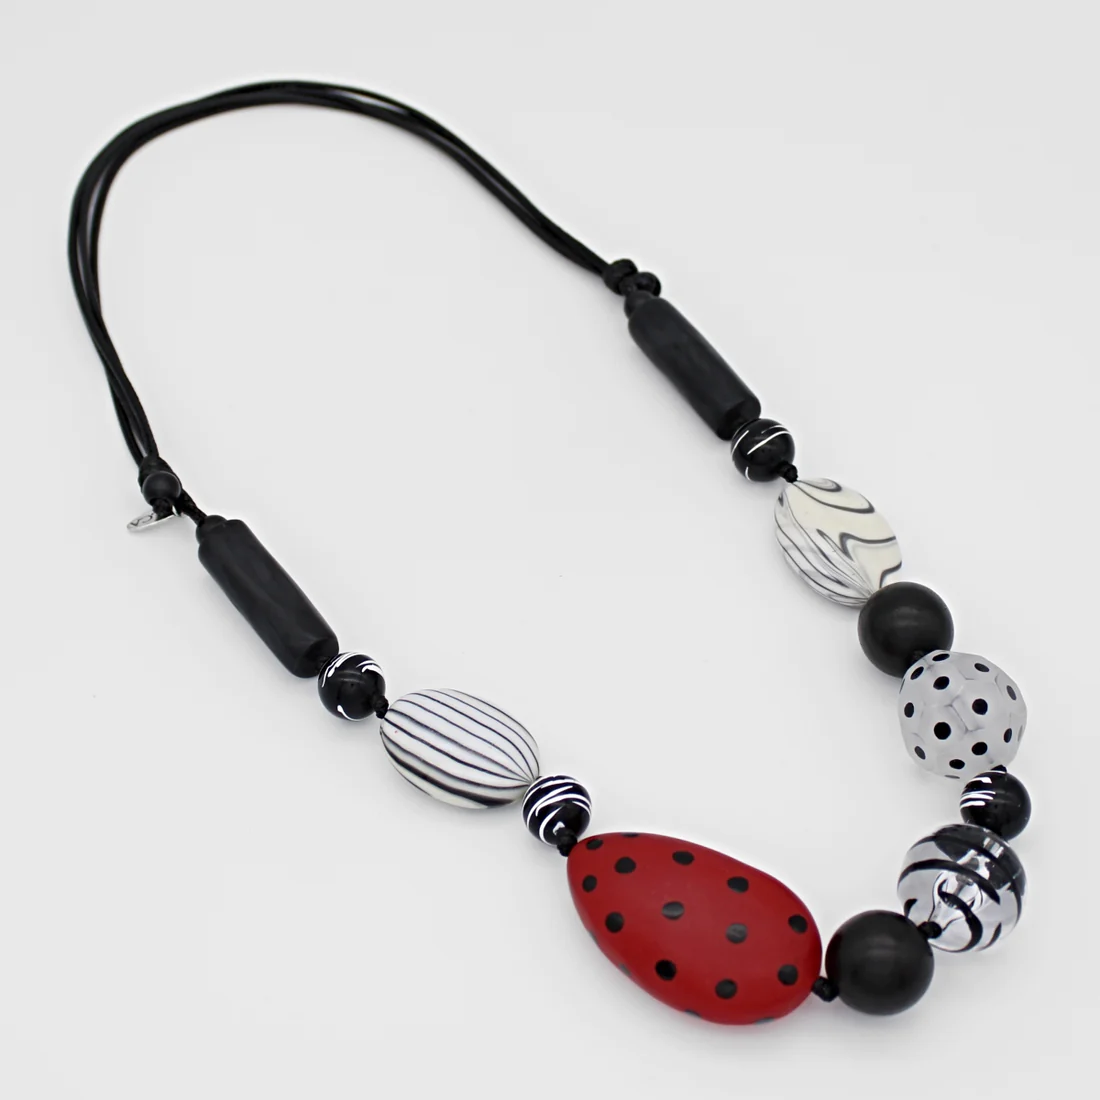 Red and Black Bead Necklace